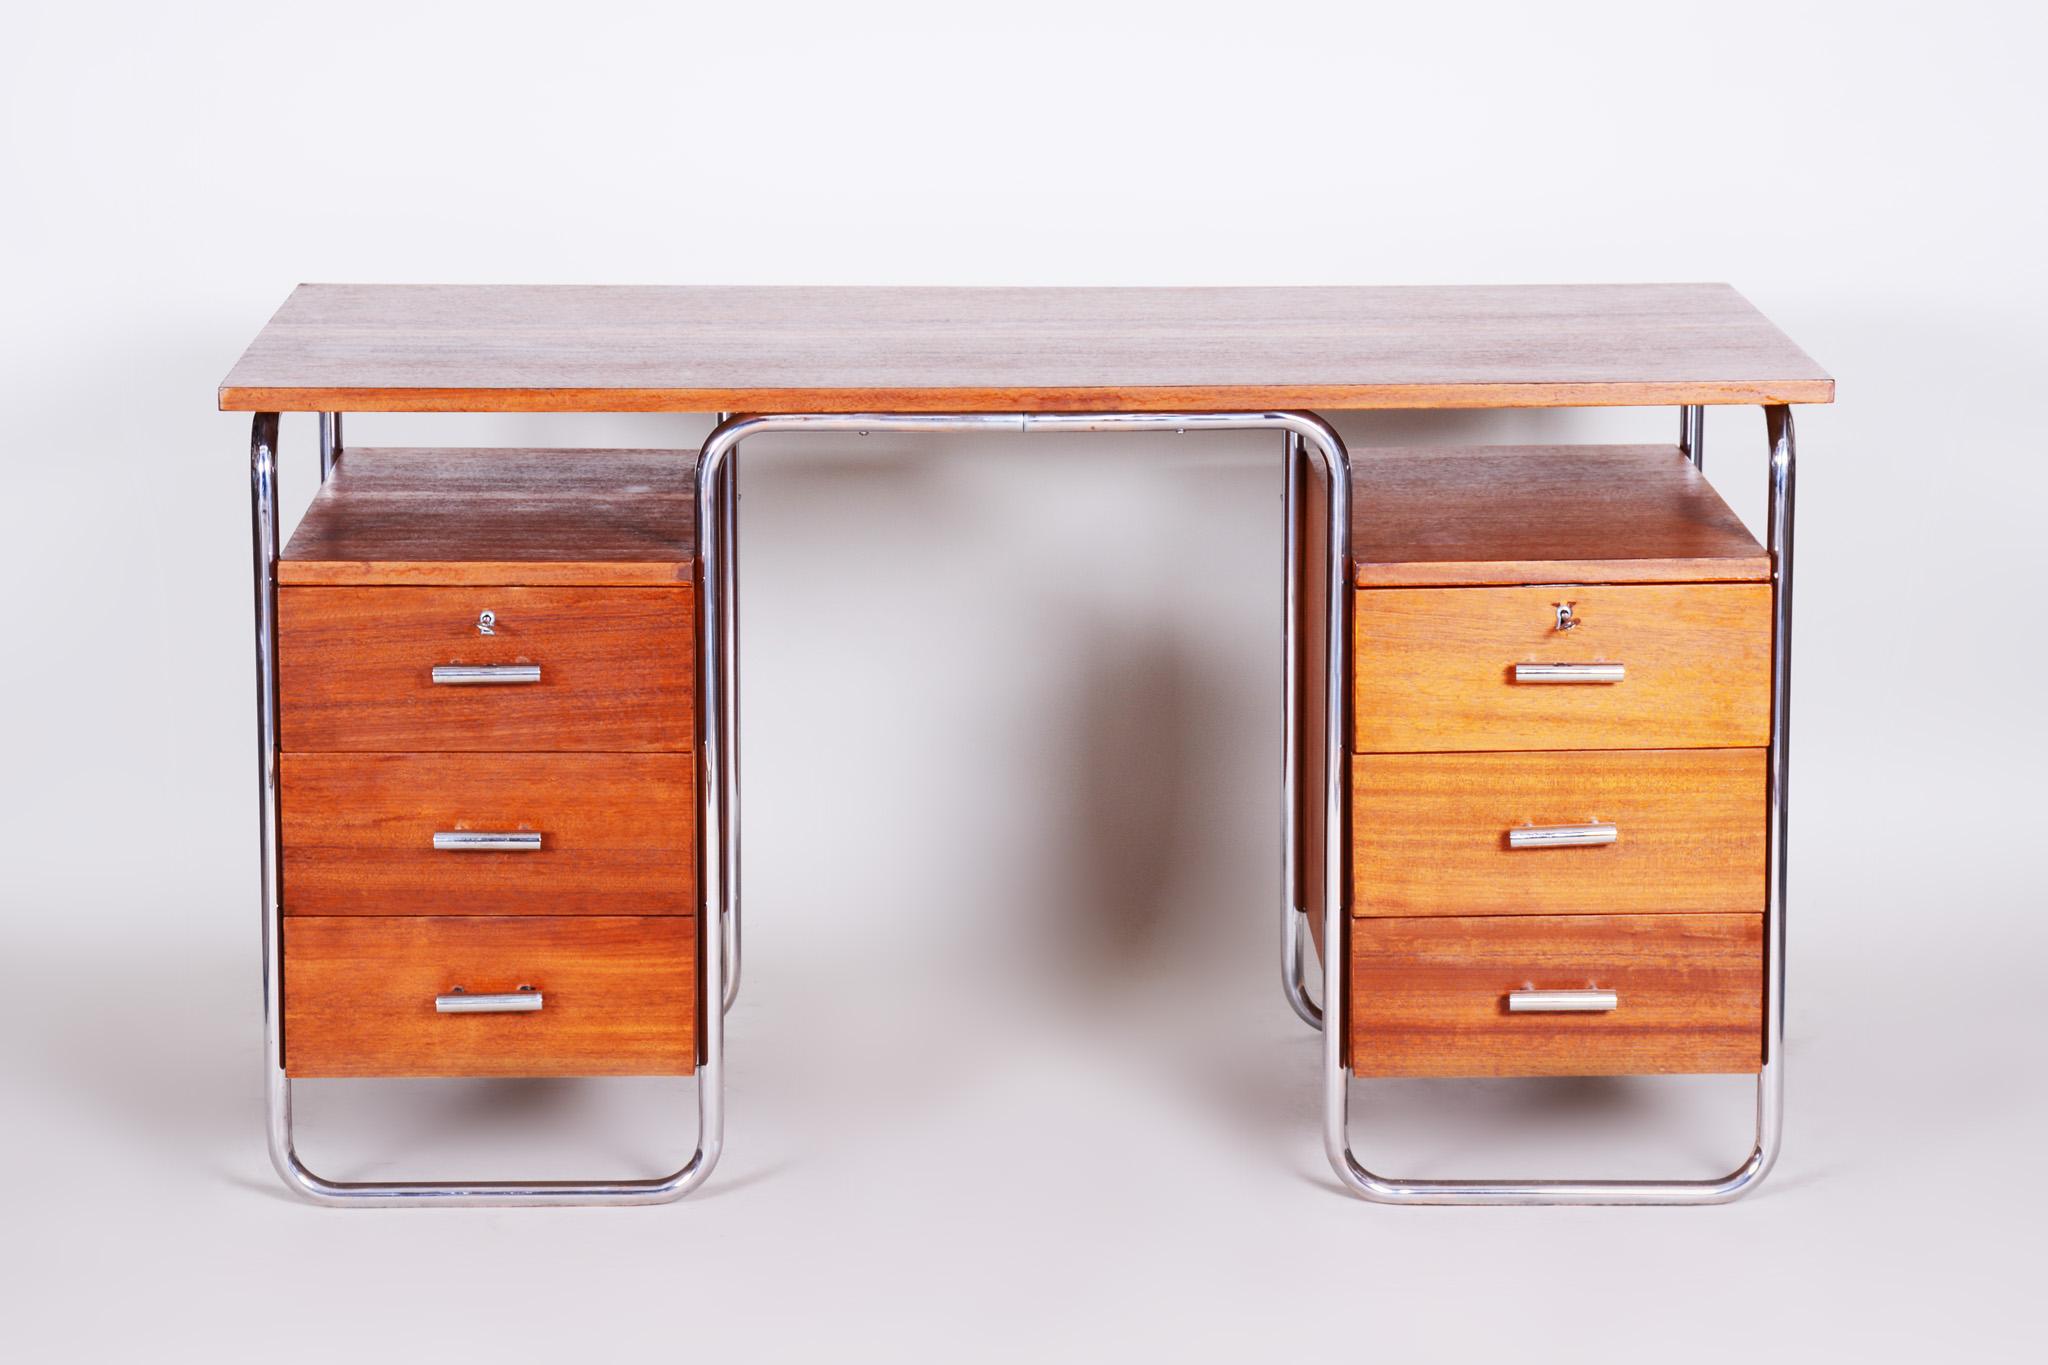 Desk with a frame in tubular chromed steel.
Manufactured by Robert Slezak factory, in the 1930s.
Wood is completely restored. The original veneer is preserved.
Tubular steel with original chrome plating and patina. Fully cleaned.